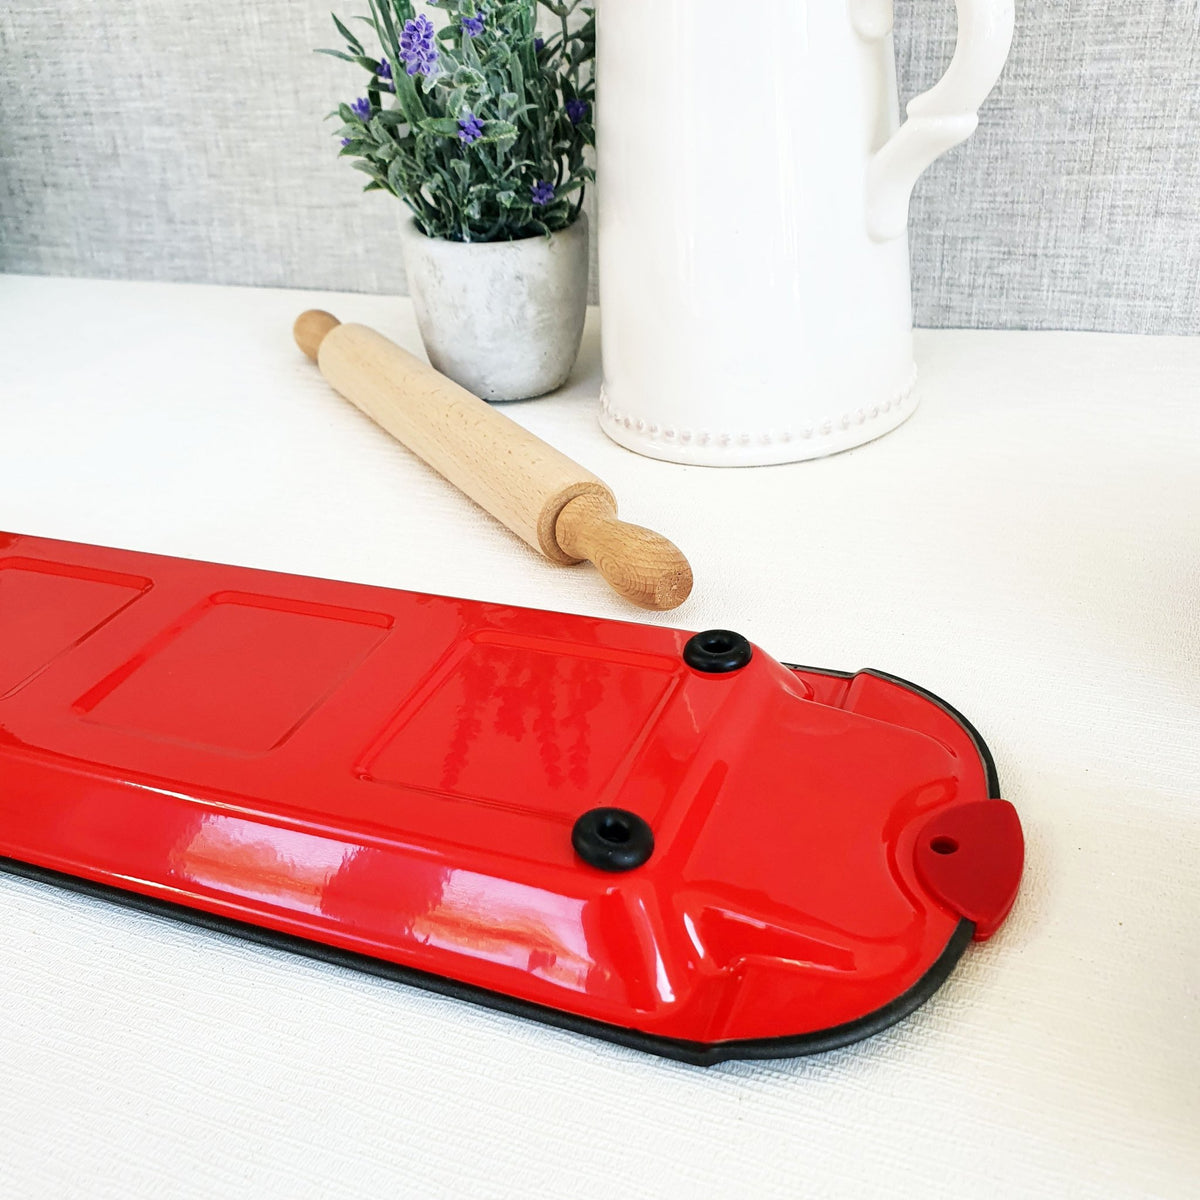 Ravioli Cutting Tray Base Red with rolling pin and plant on white surface